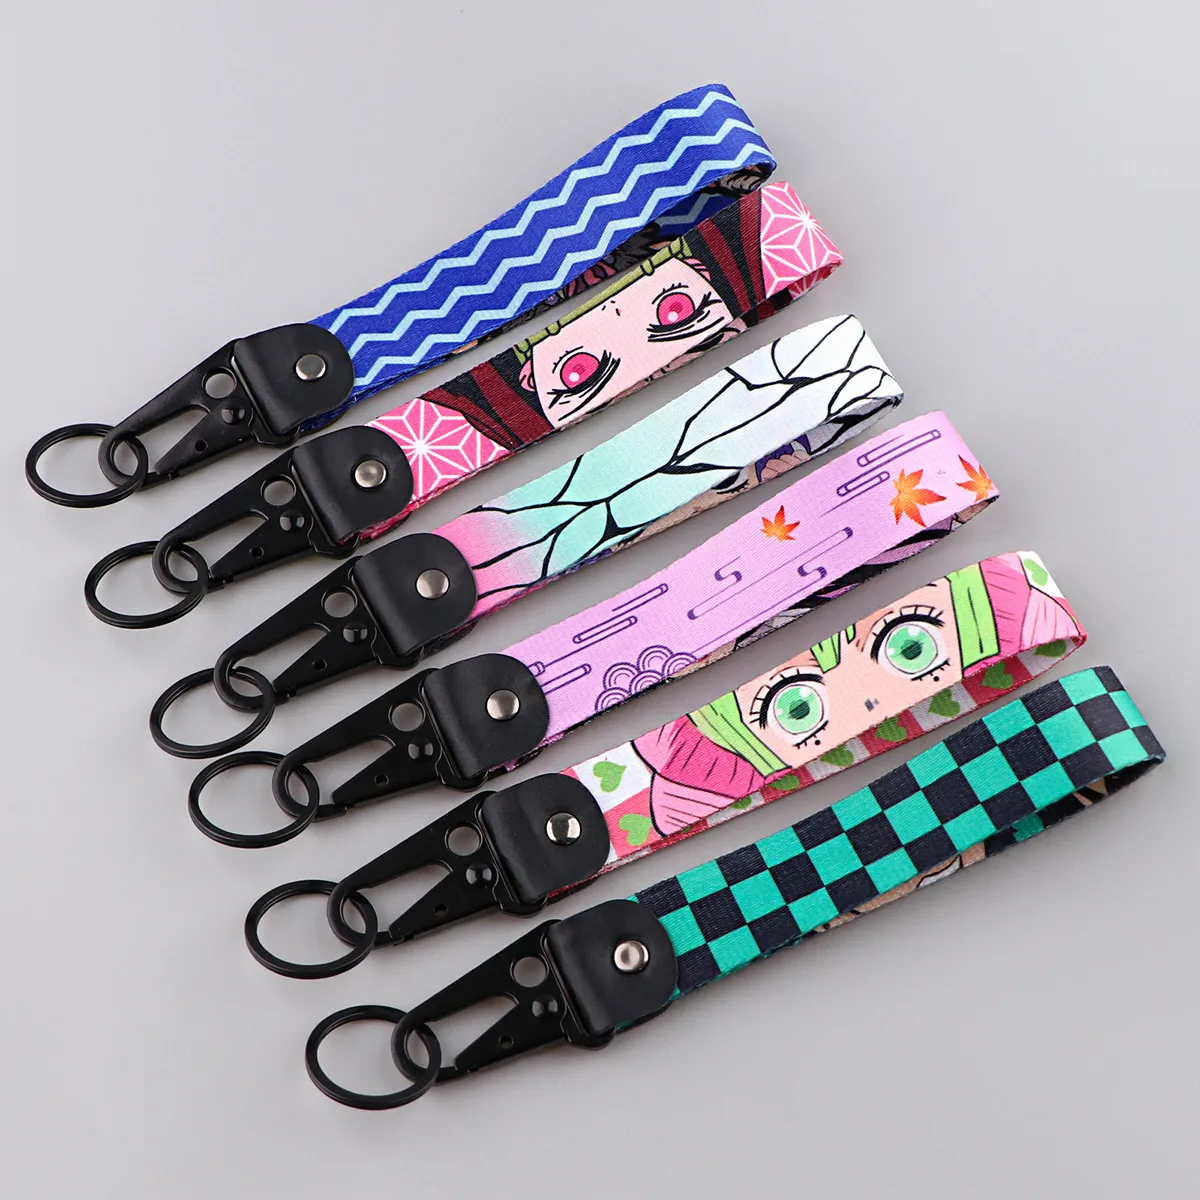 Keychains & Lanyards Various Types Of Cartoon Cool Key Tag Embroidery Fobs For Motorcycles Cars Bag Backpack Keychain Fashion Ring Gi Otyd0